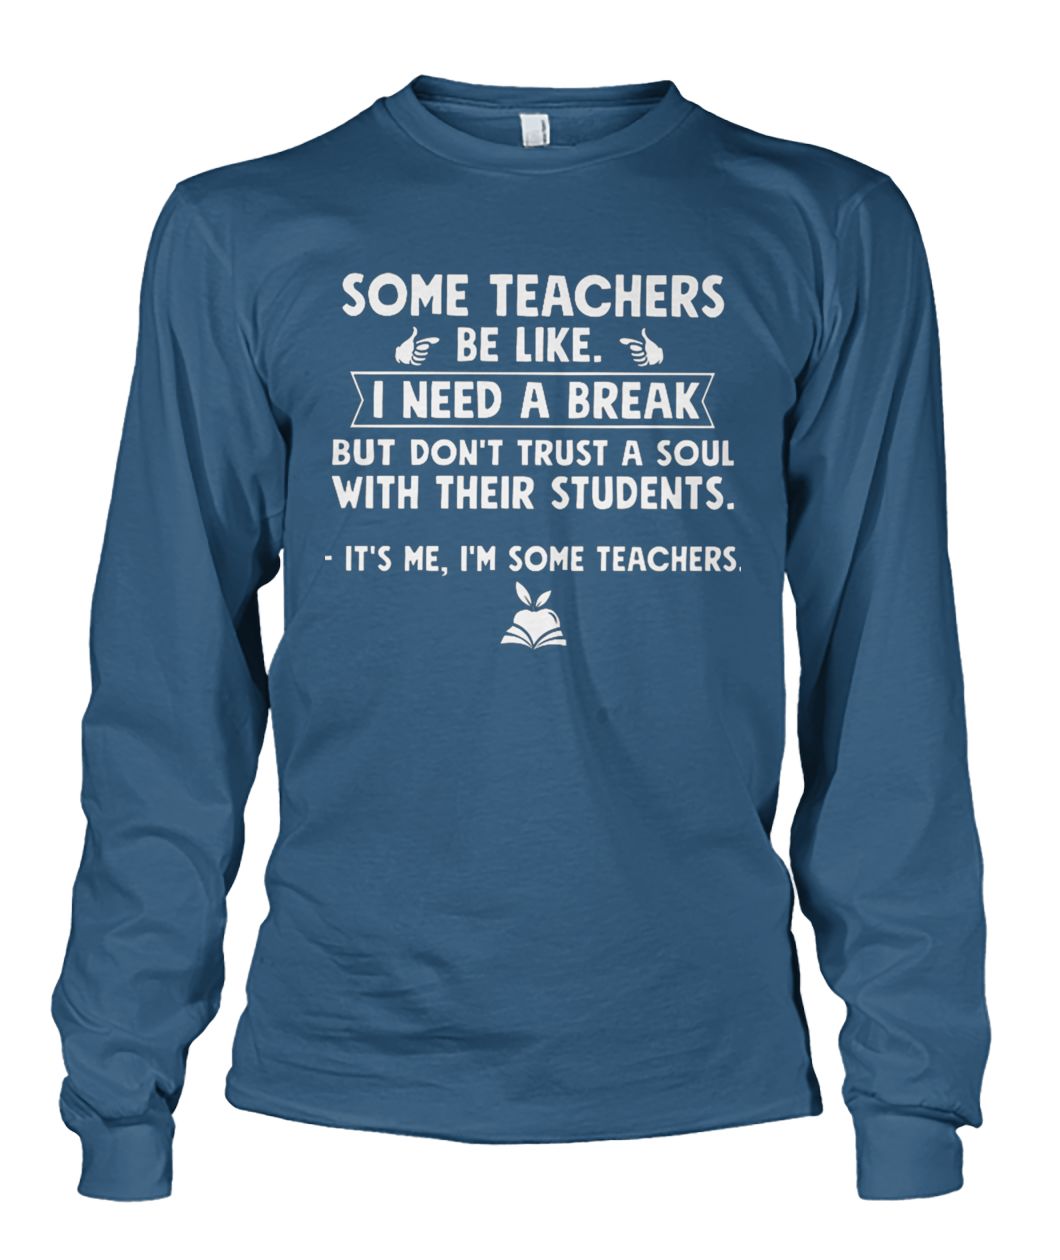 Some teachers be like I need a break but don't trust a soul with their students unisex long sleeve